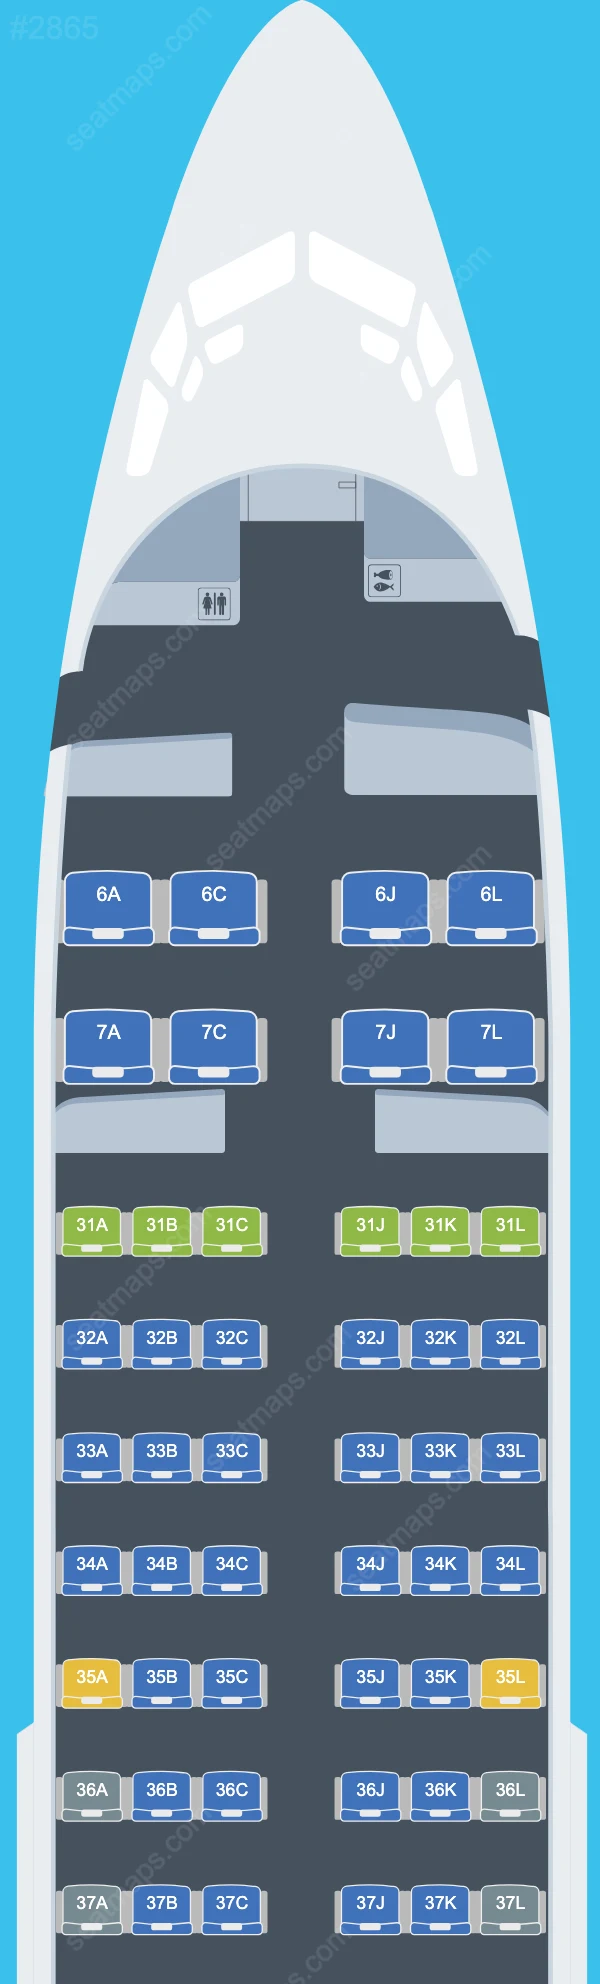 China Eastern Boeing 737 Seat Maps 737-700